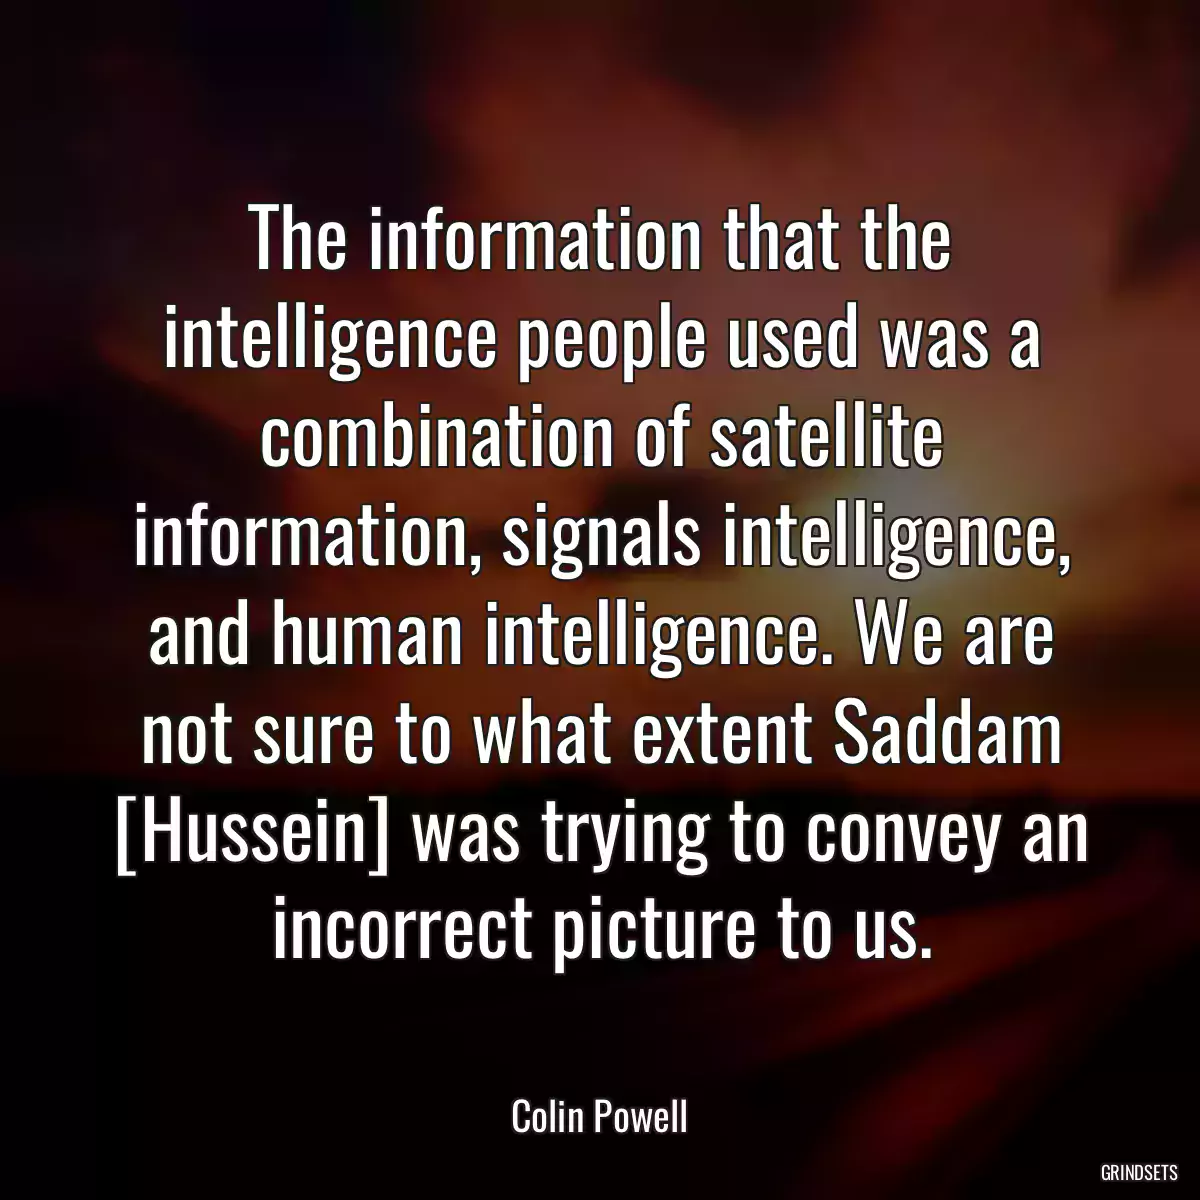 The information that the intelligence people used was a combination of satellite information, signals intelligence, and human intelligence. We are not sure to what extent Saddam [Hussein] was trying to convey an incorrect picture to us.